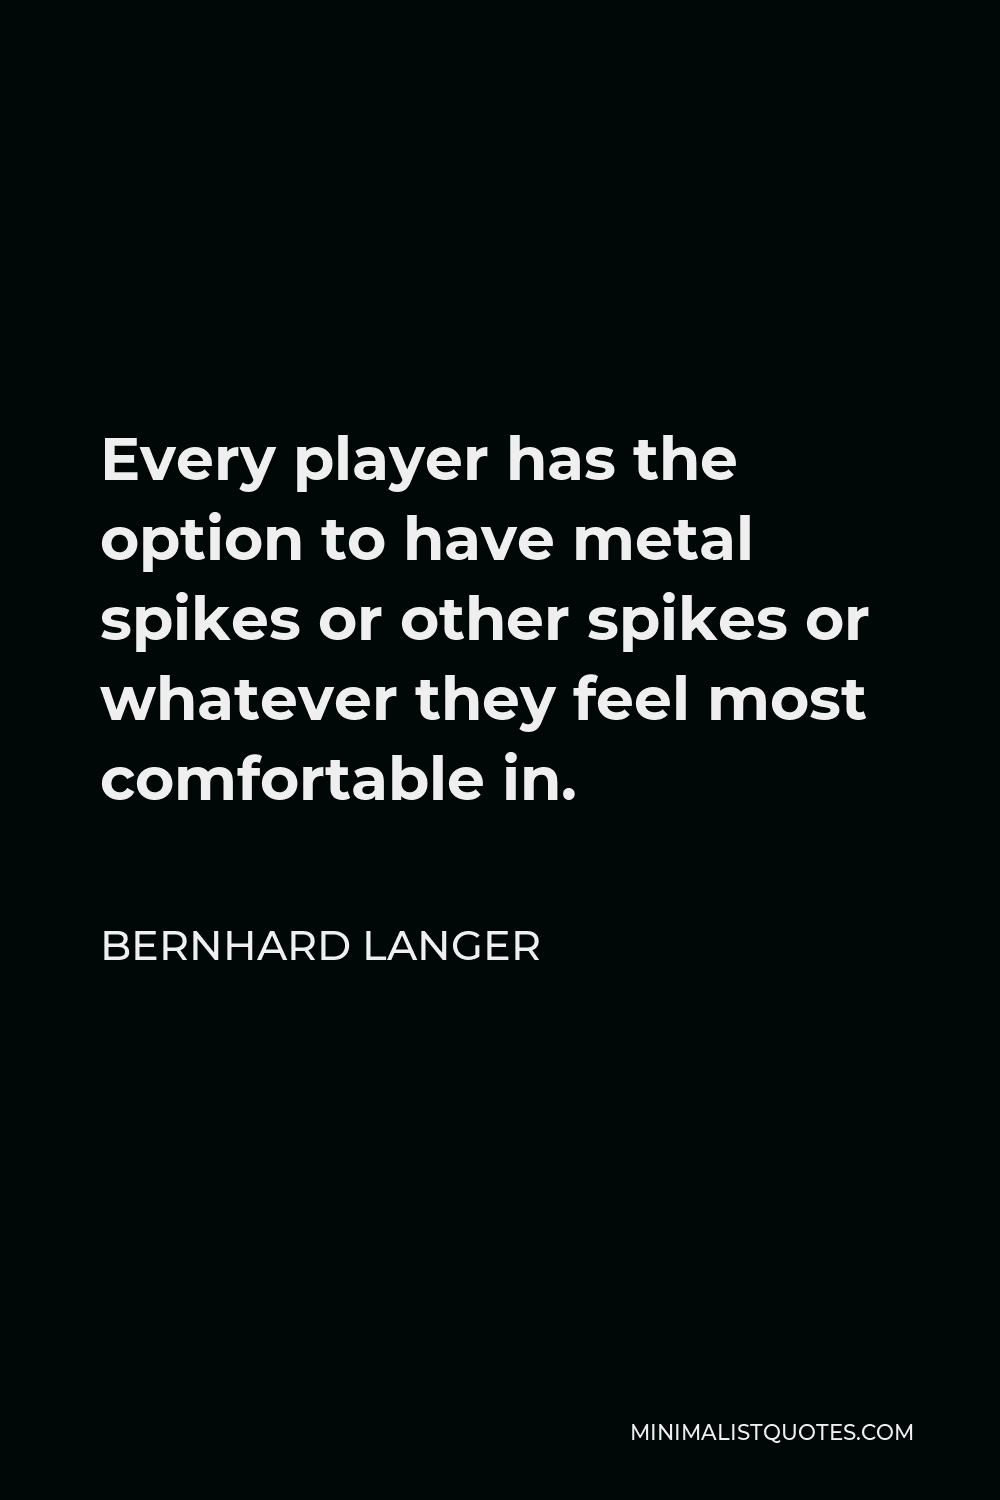 Bernhard Langer Quote - Every player has the option to have metal spikes or other spikes or whatever they feel most comfortable in.